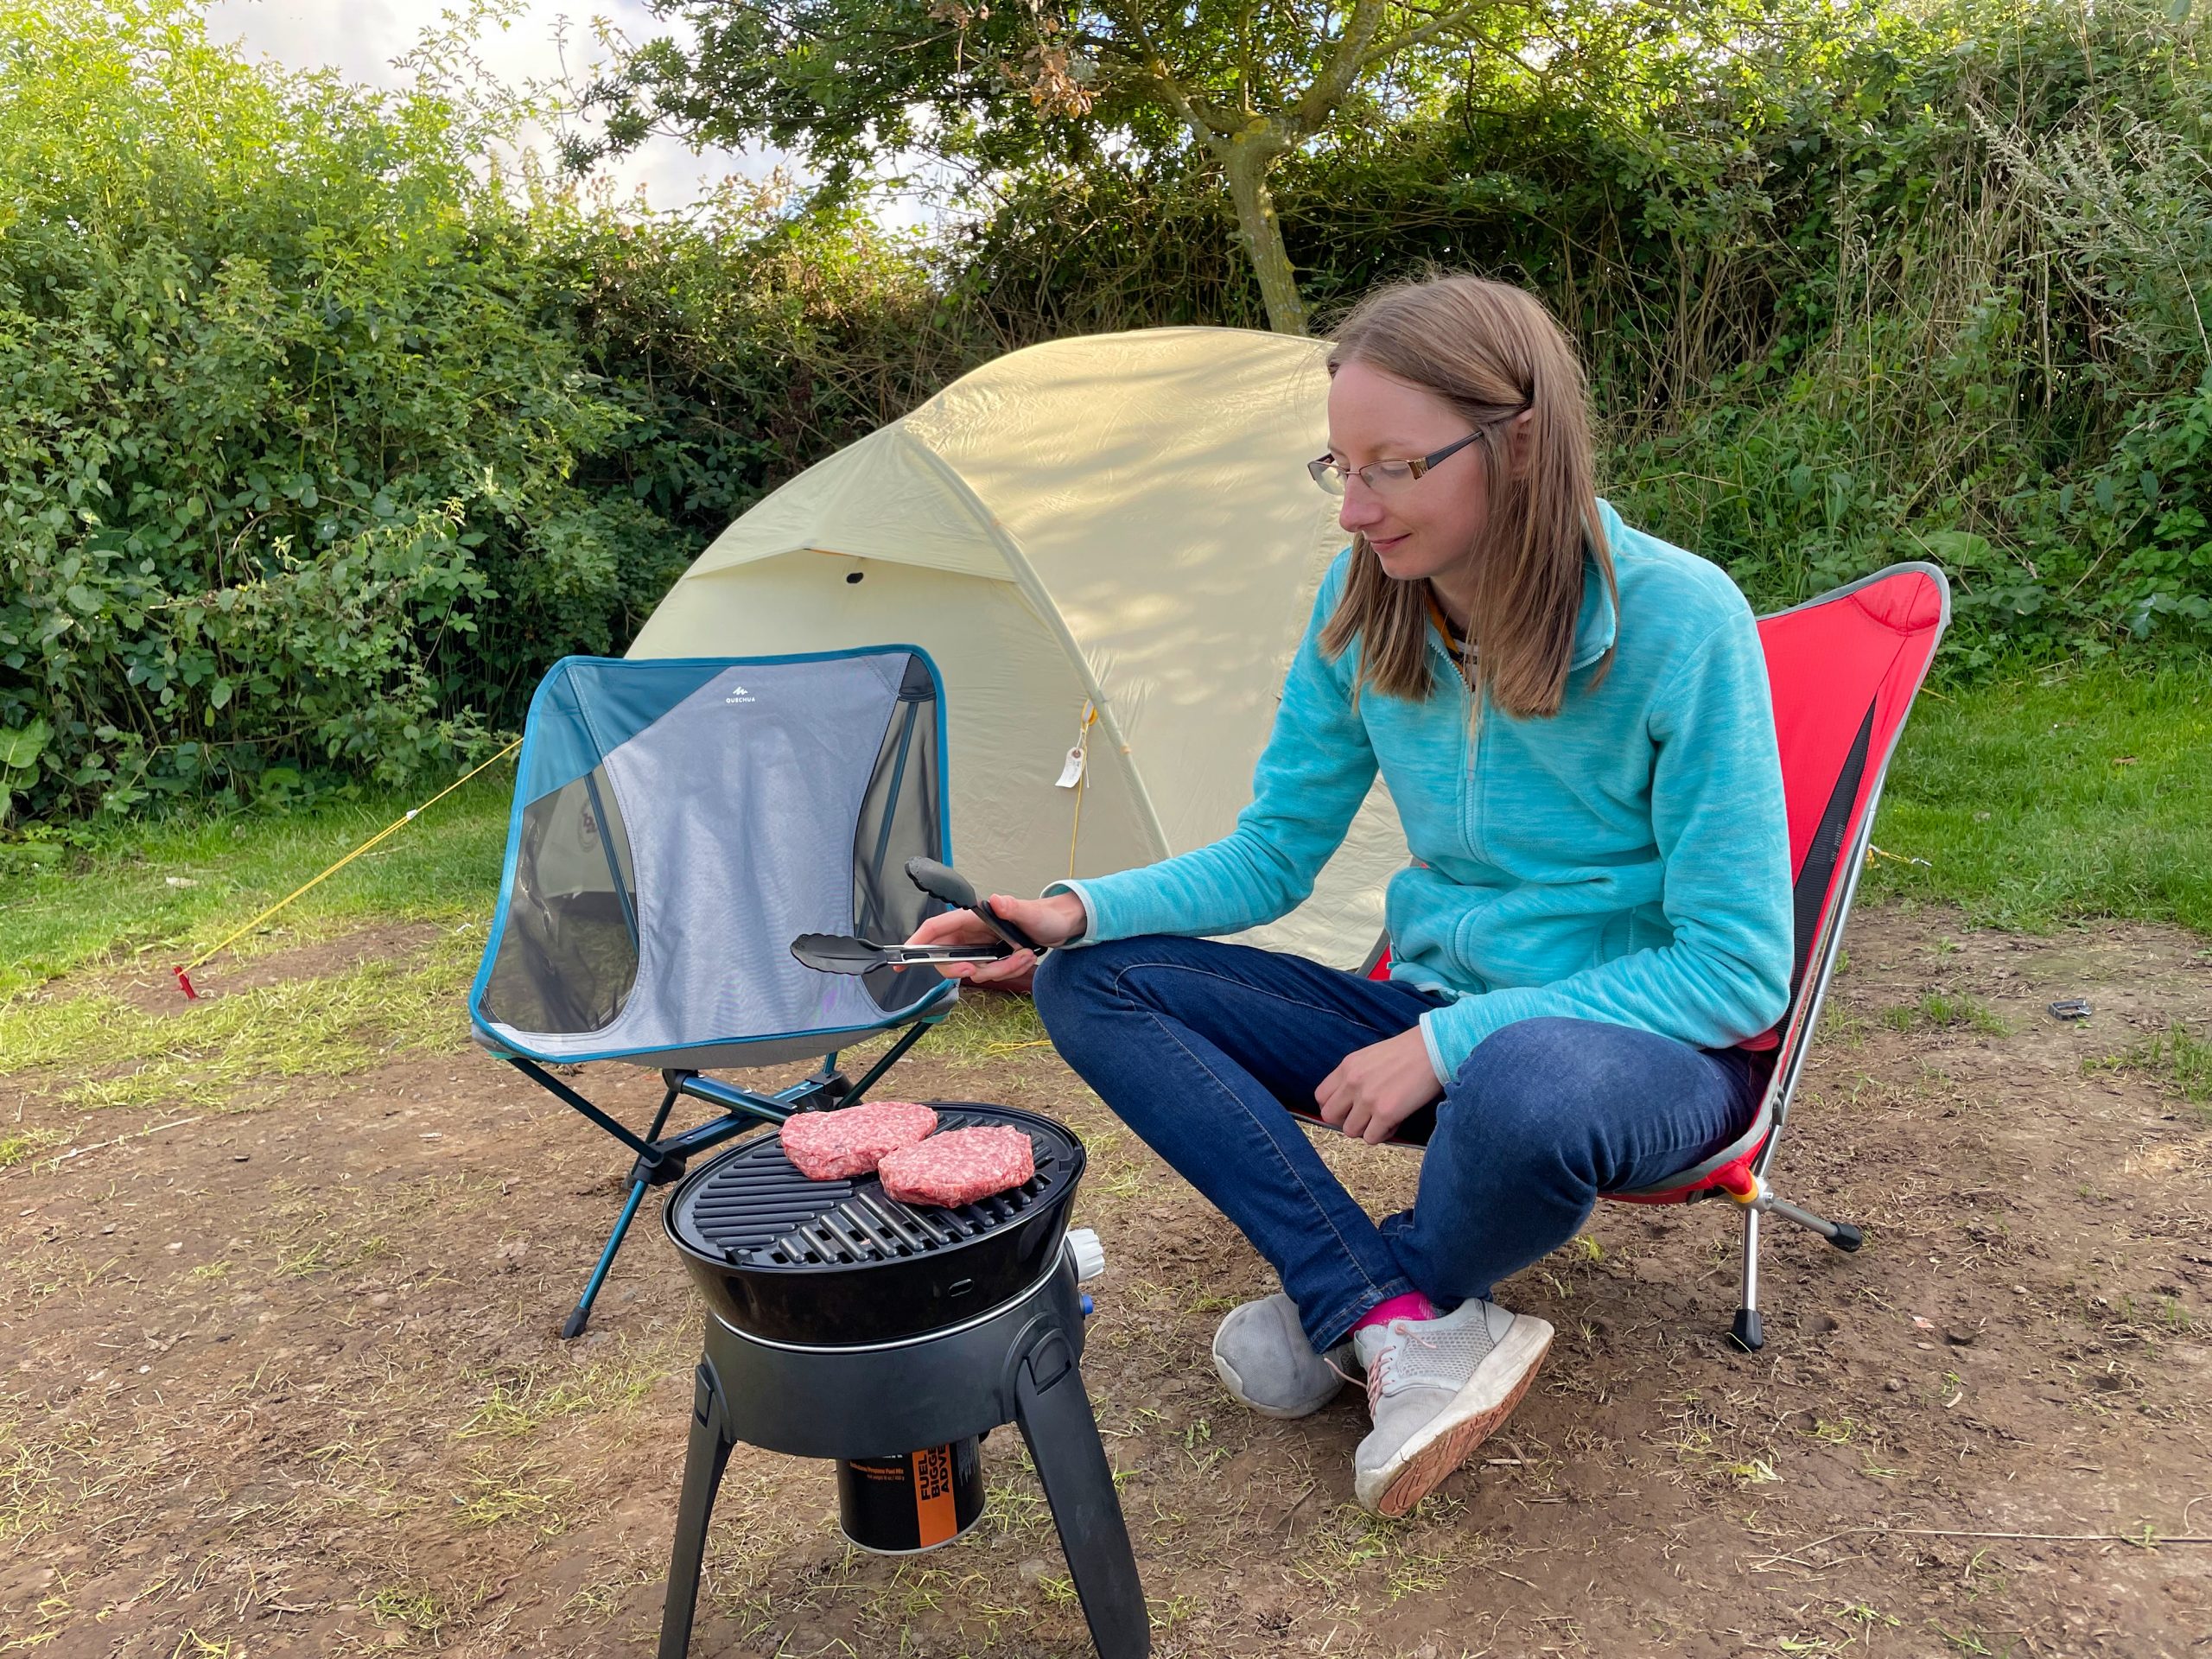 Small Size, Big Chill: Mini Fridges for Camping Reviewed